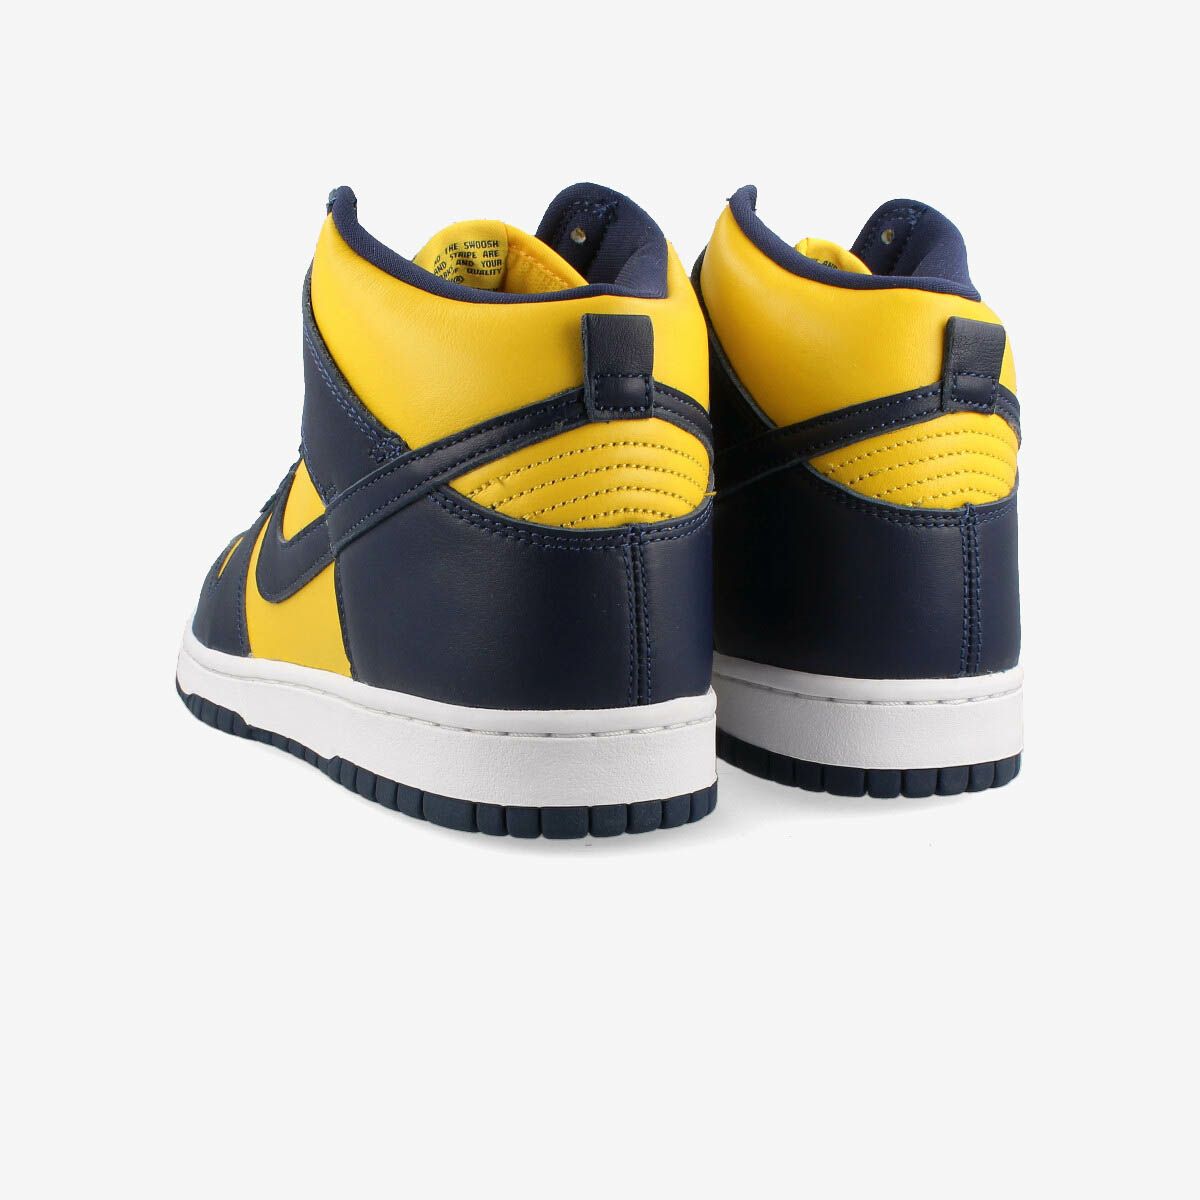 NIKE DUNK HIGH "Maize and Blue"メンズ